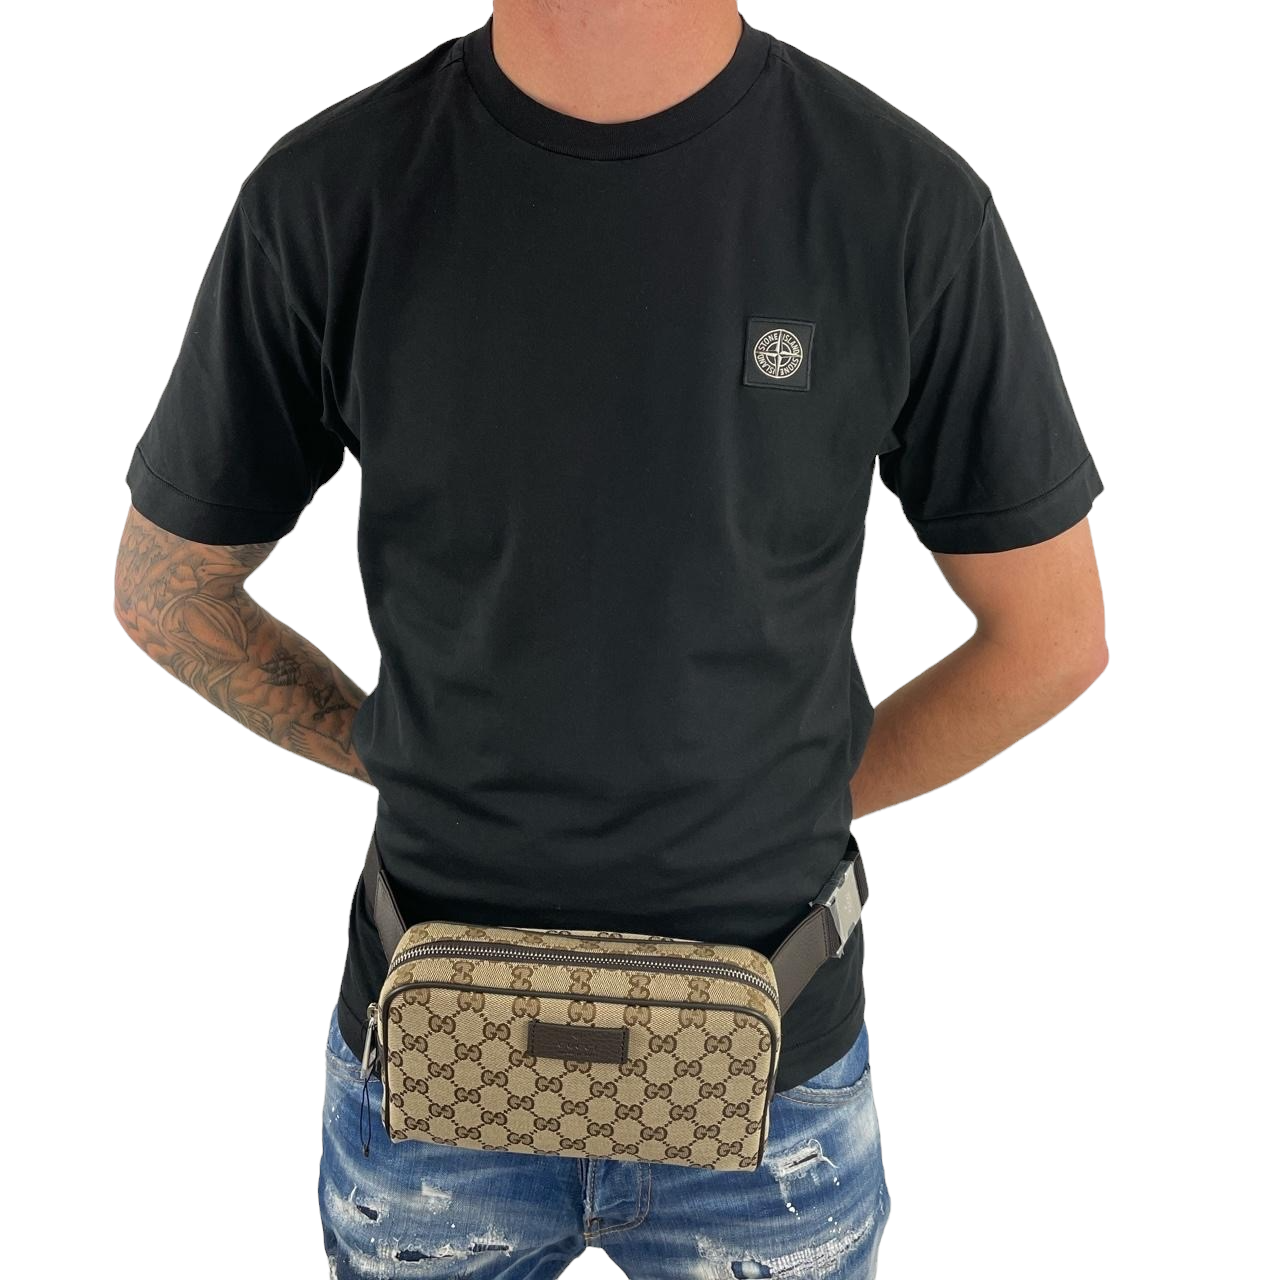 Shop GUCCI Unisex Street Style Crossbody Bag Logo Outlet by winwinco